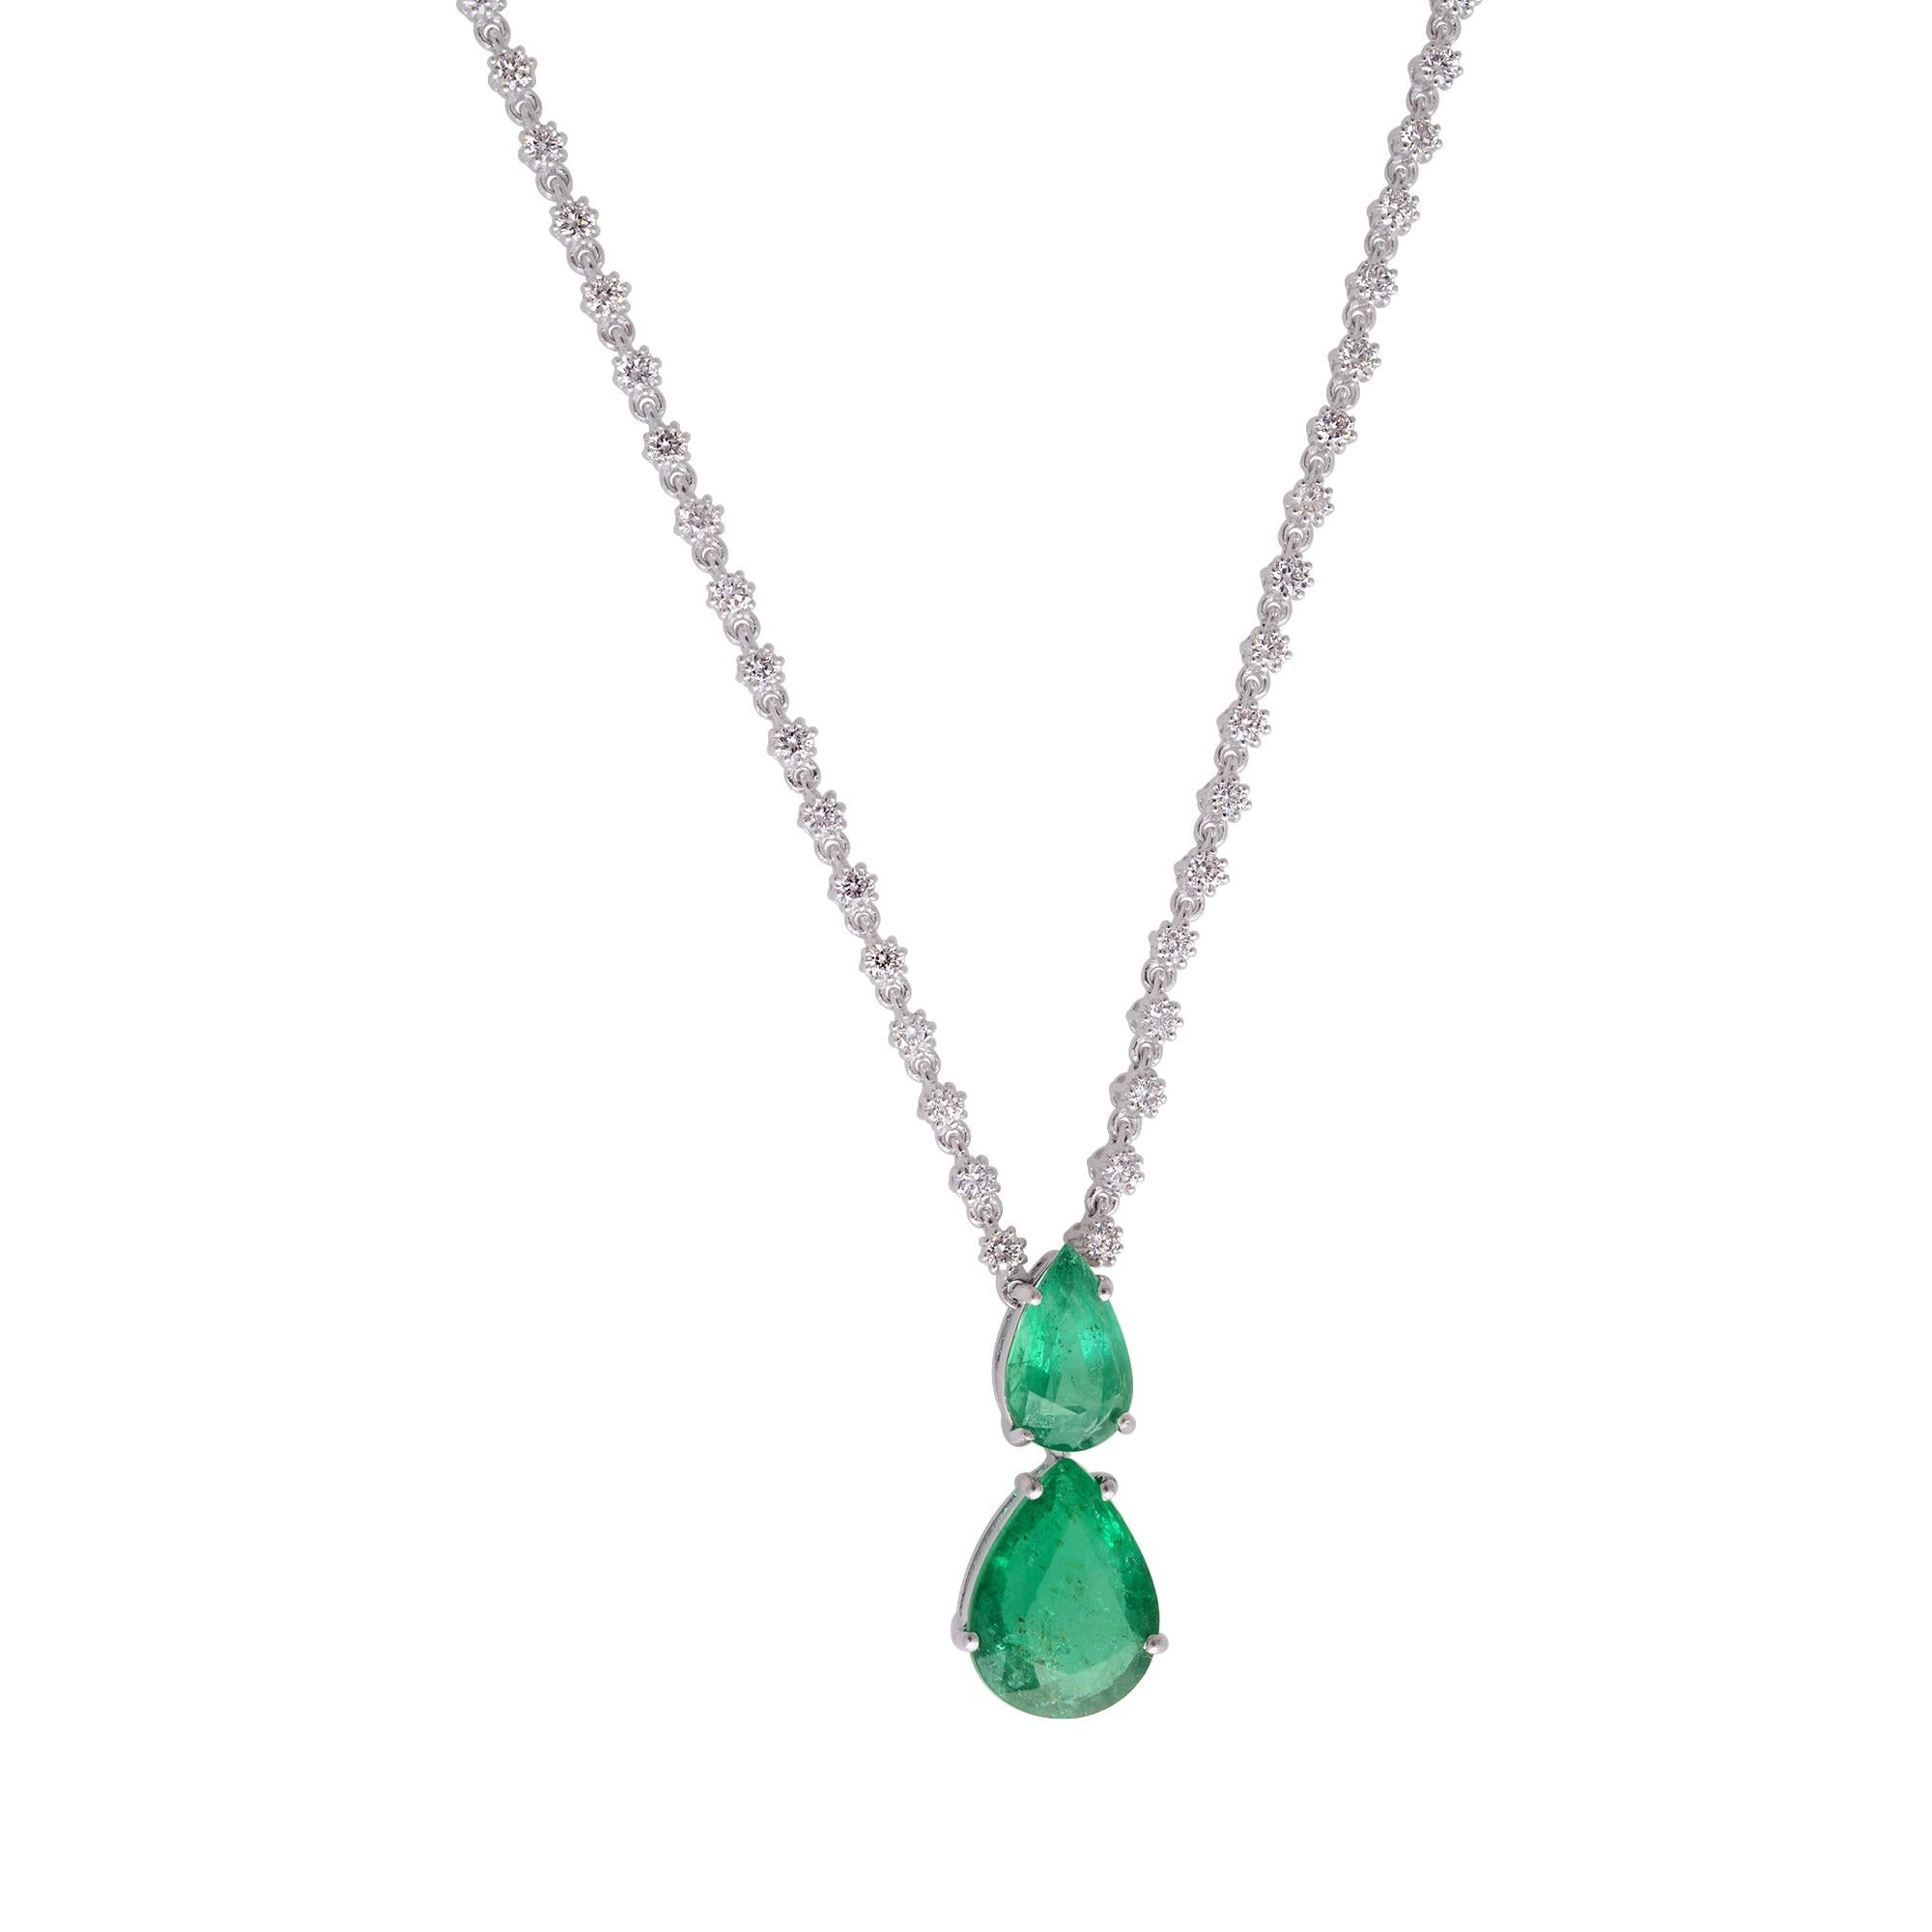 The emerald and diamonds are set in a solid 18k white gold charm pendant, providing a luxurious and enduring setting that perfectly enhances their beauty. The white gold setting not only complements the gemstones and diamonds but also adds a touch